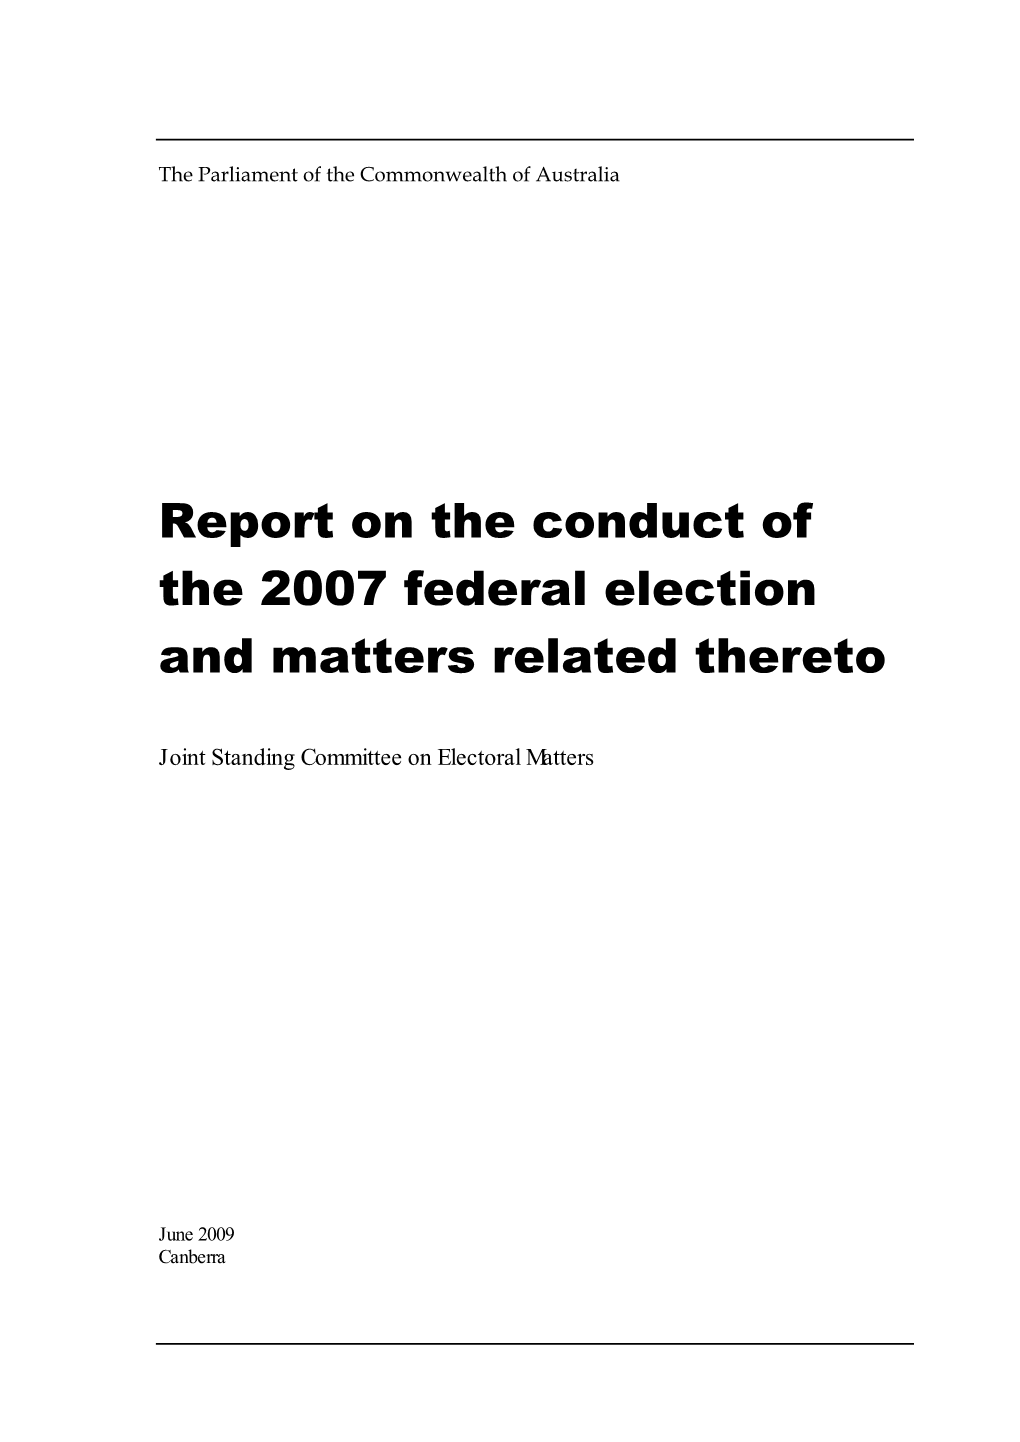 Report on the Conduct of the 2007 Federal Election and Matters Related Thereto